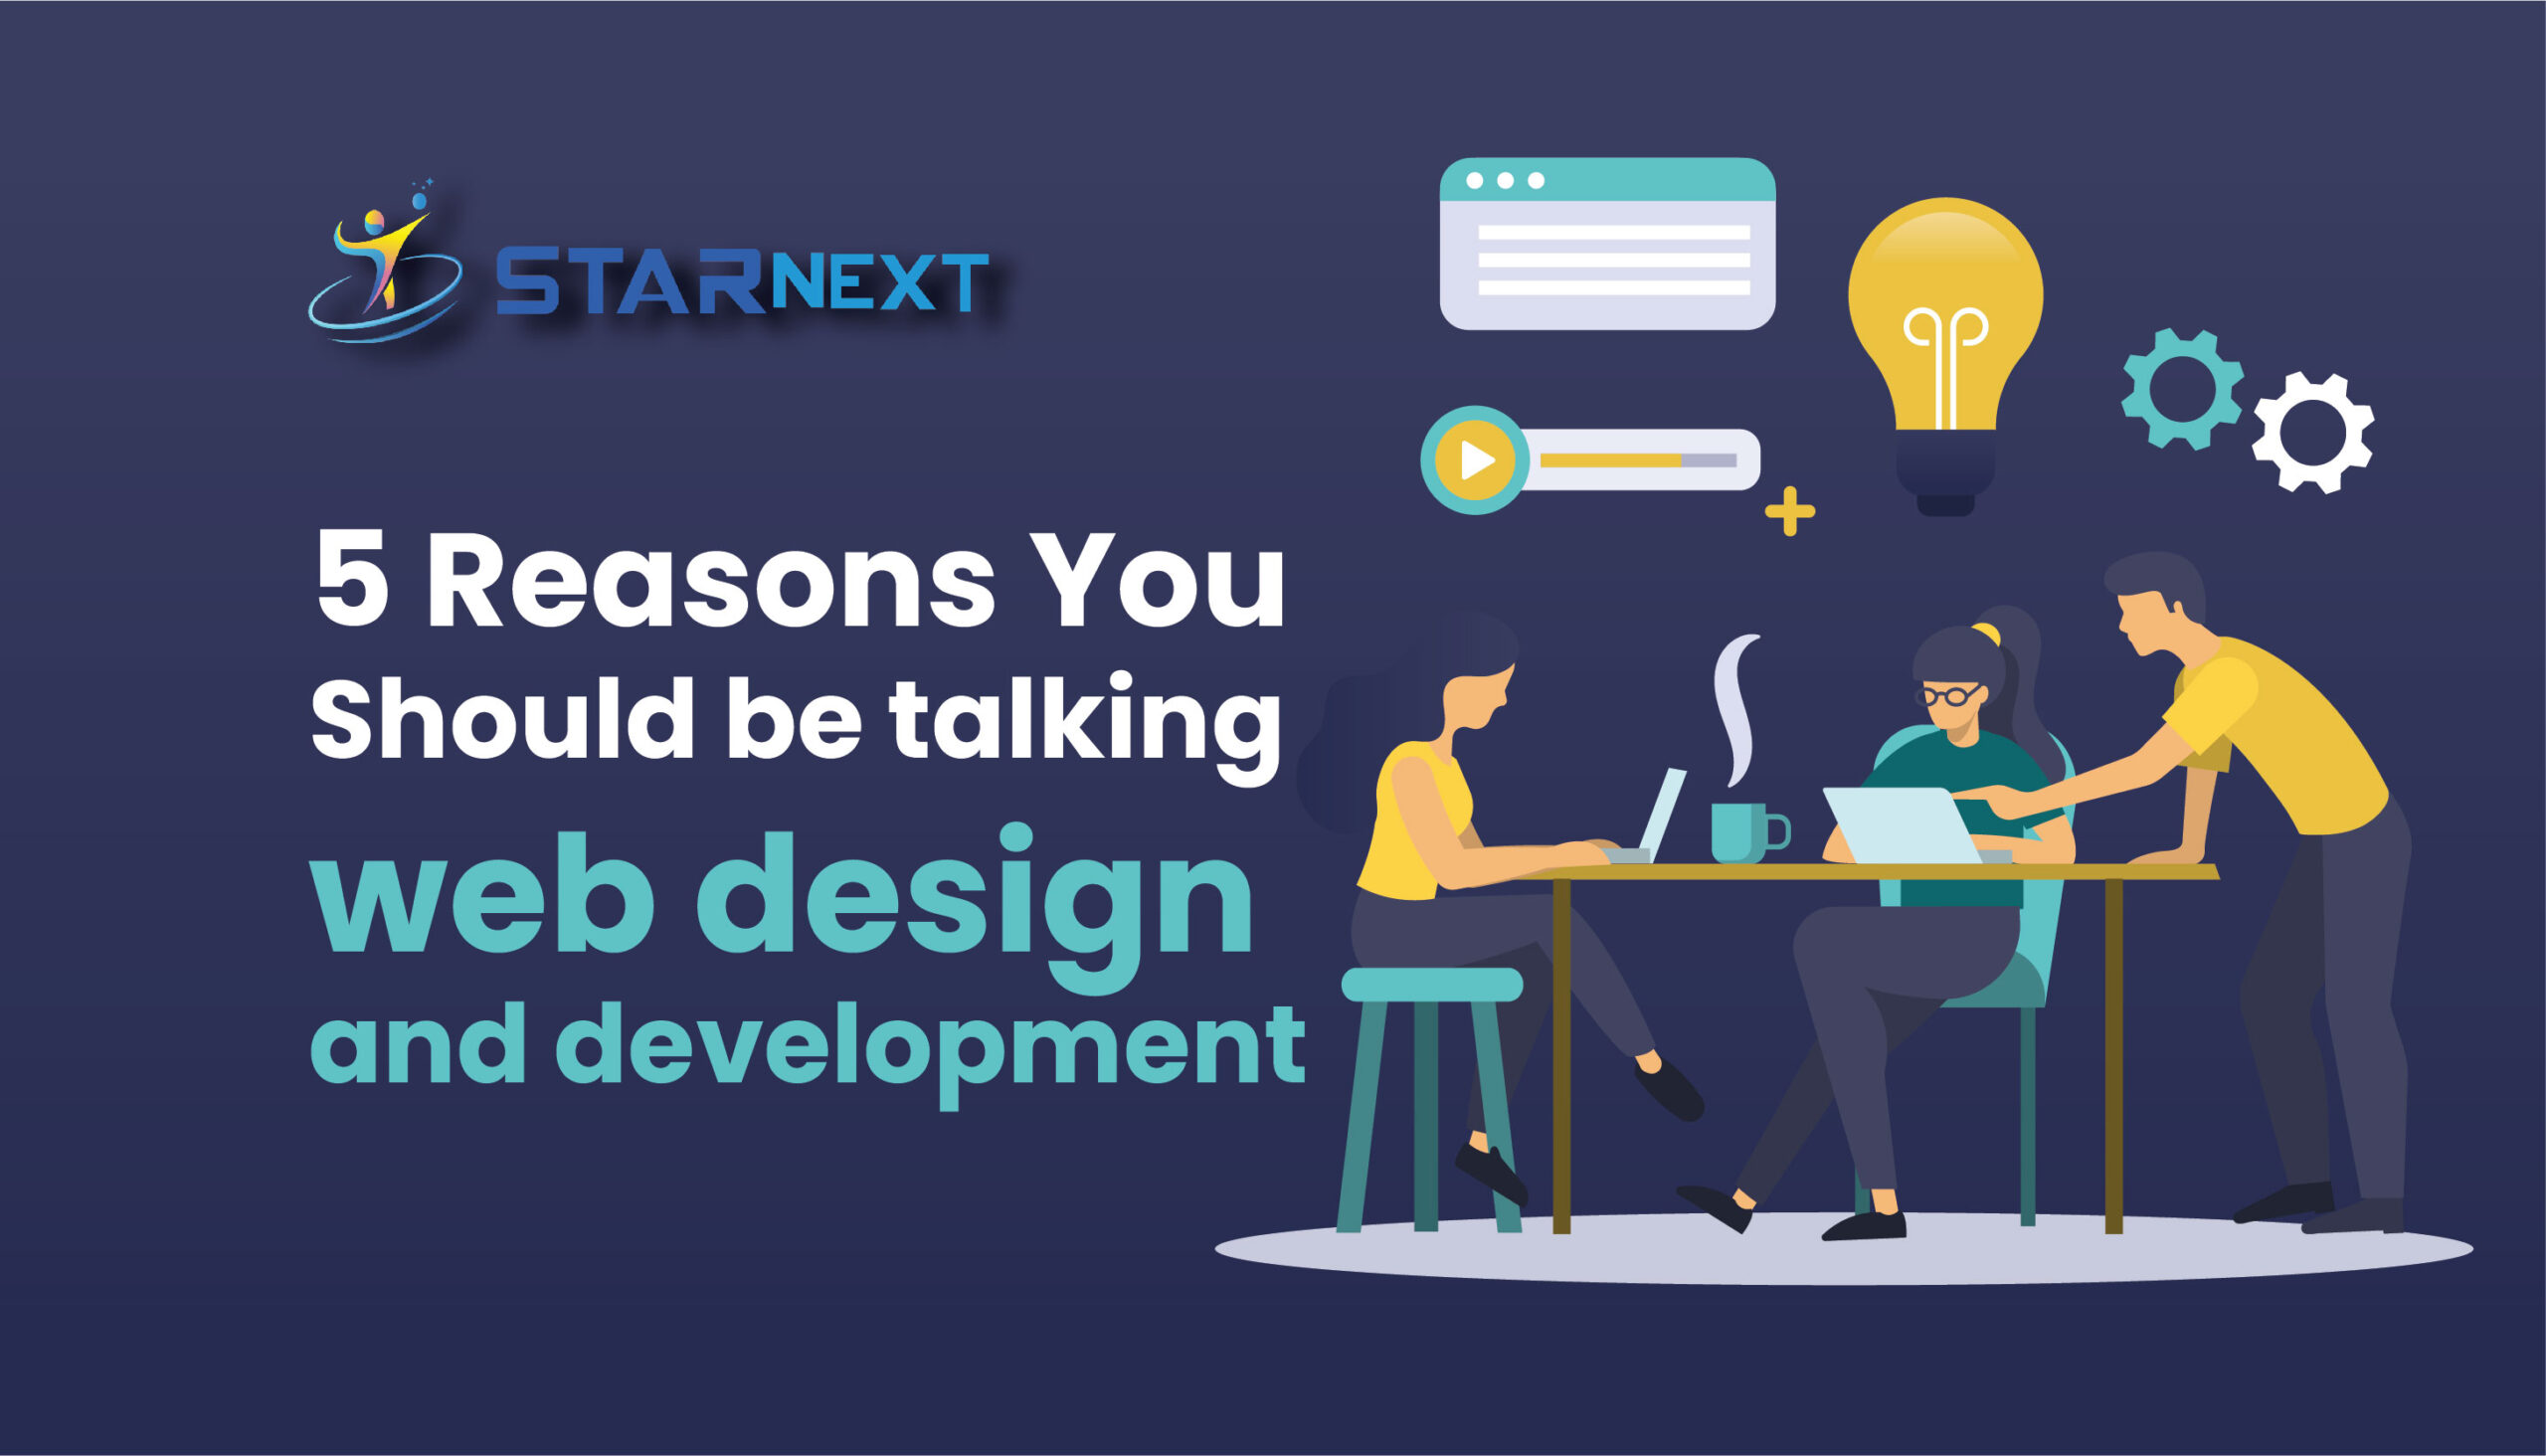 5 Reasons You Should be talking web design and development